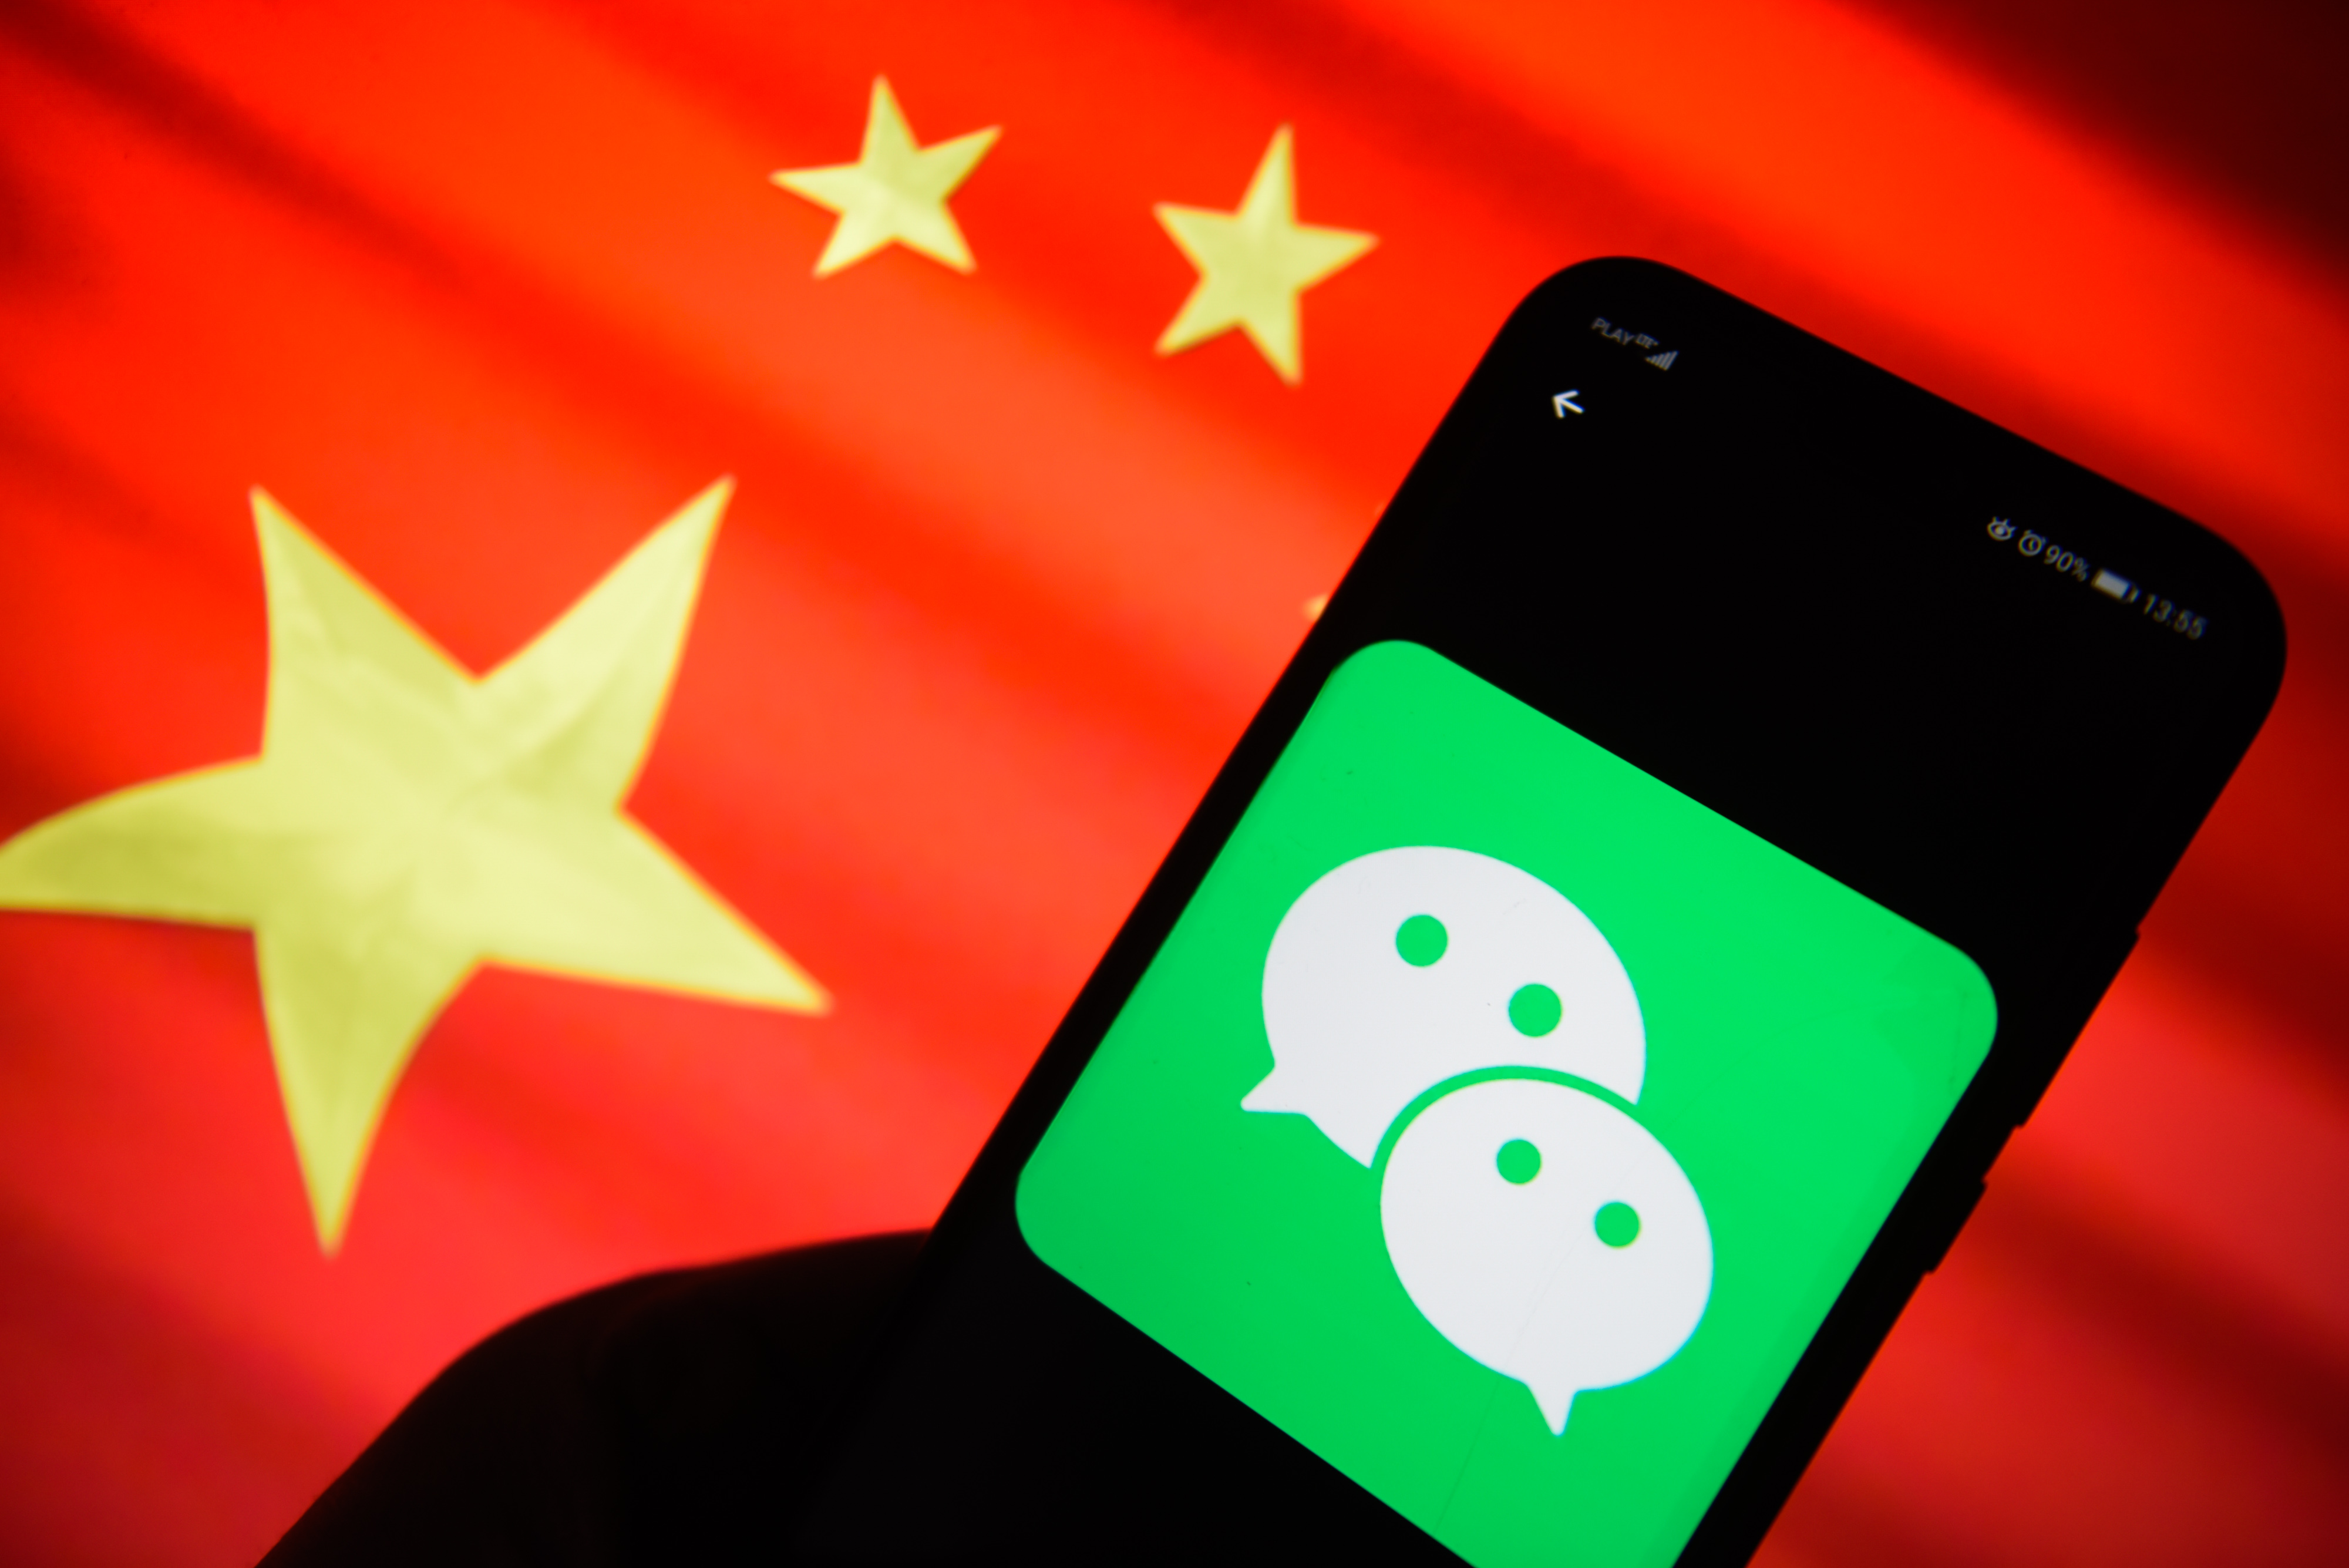 Wechat logo is seen on an android mobile phone with China's